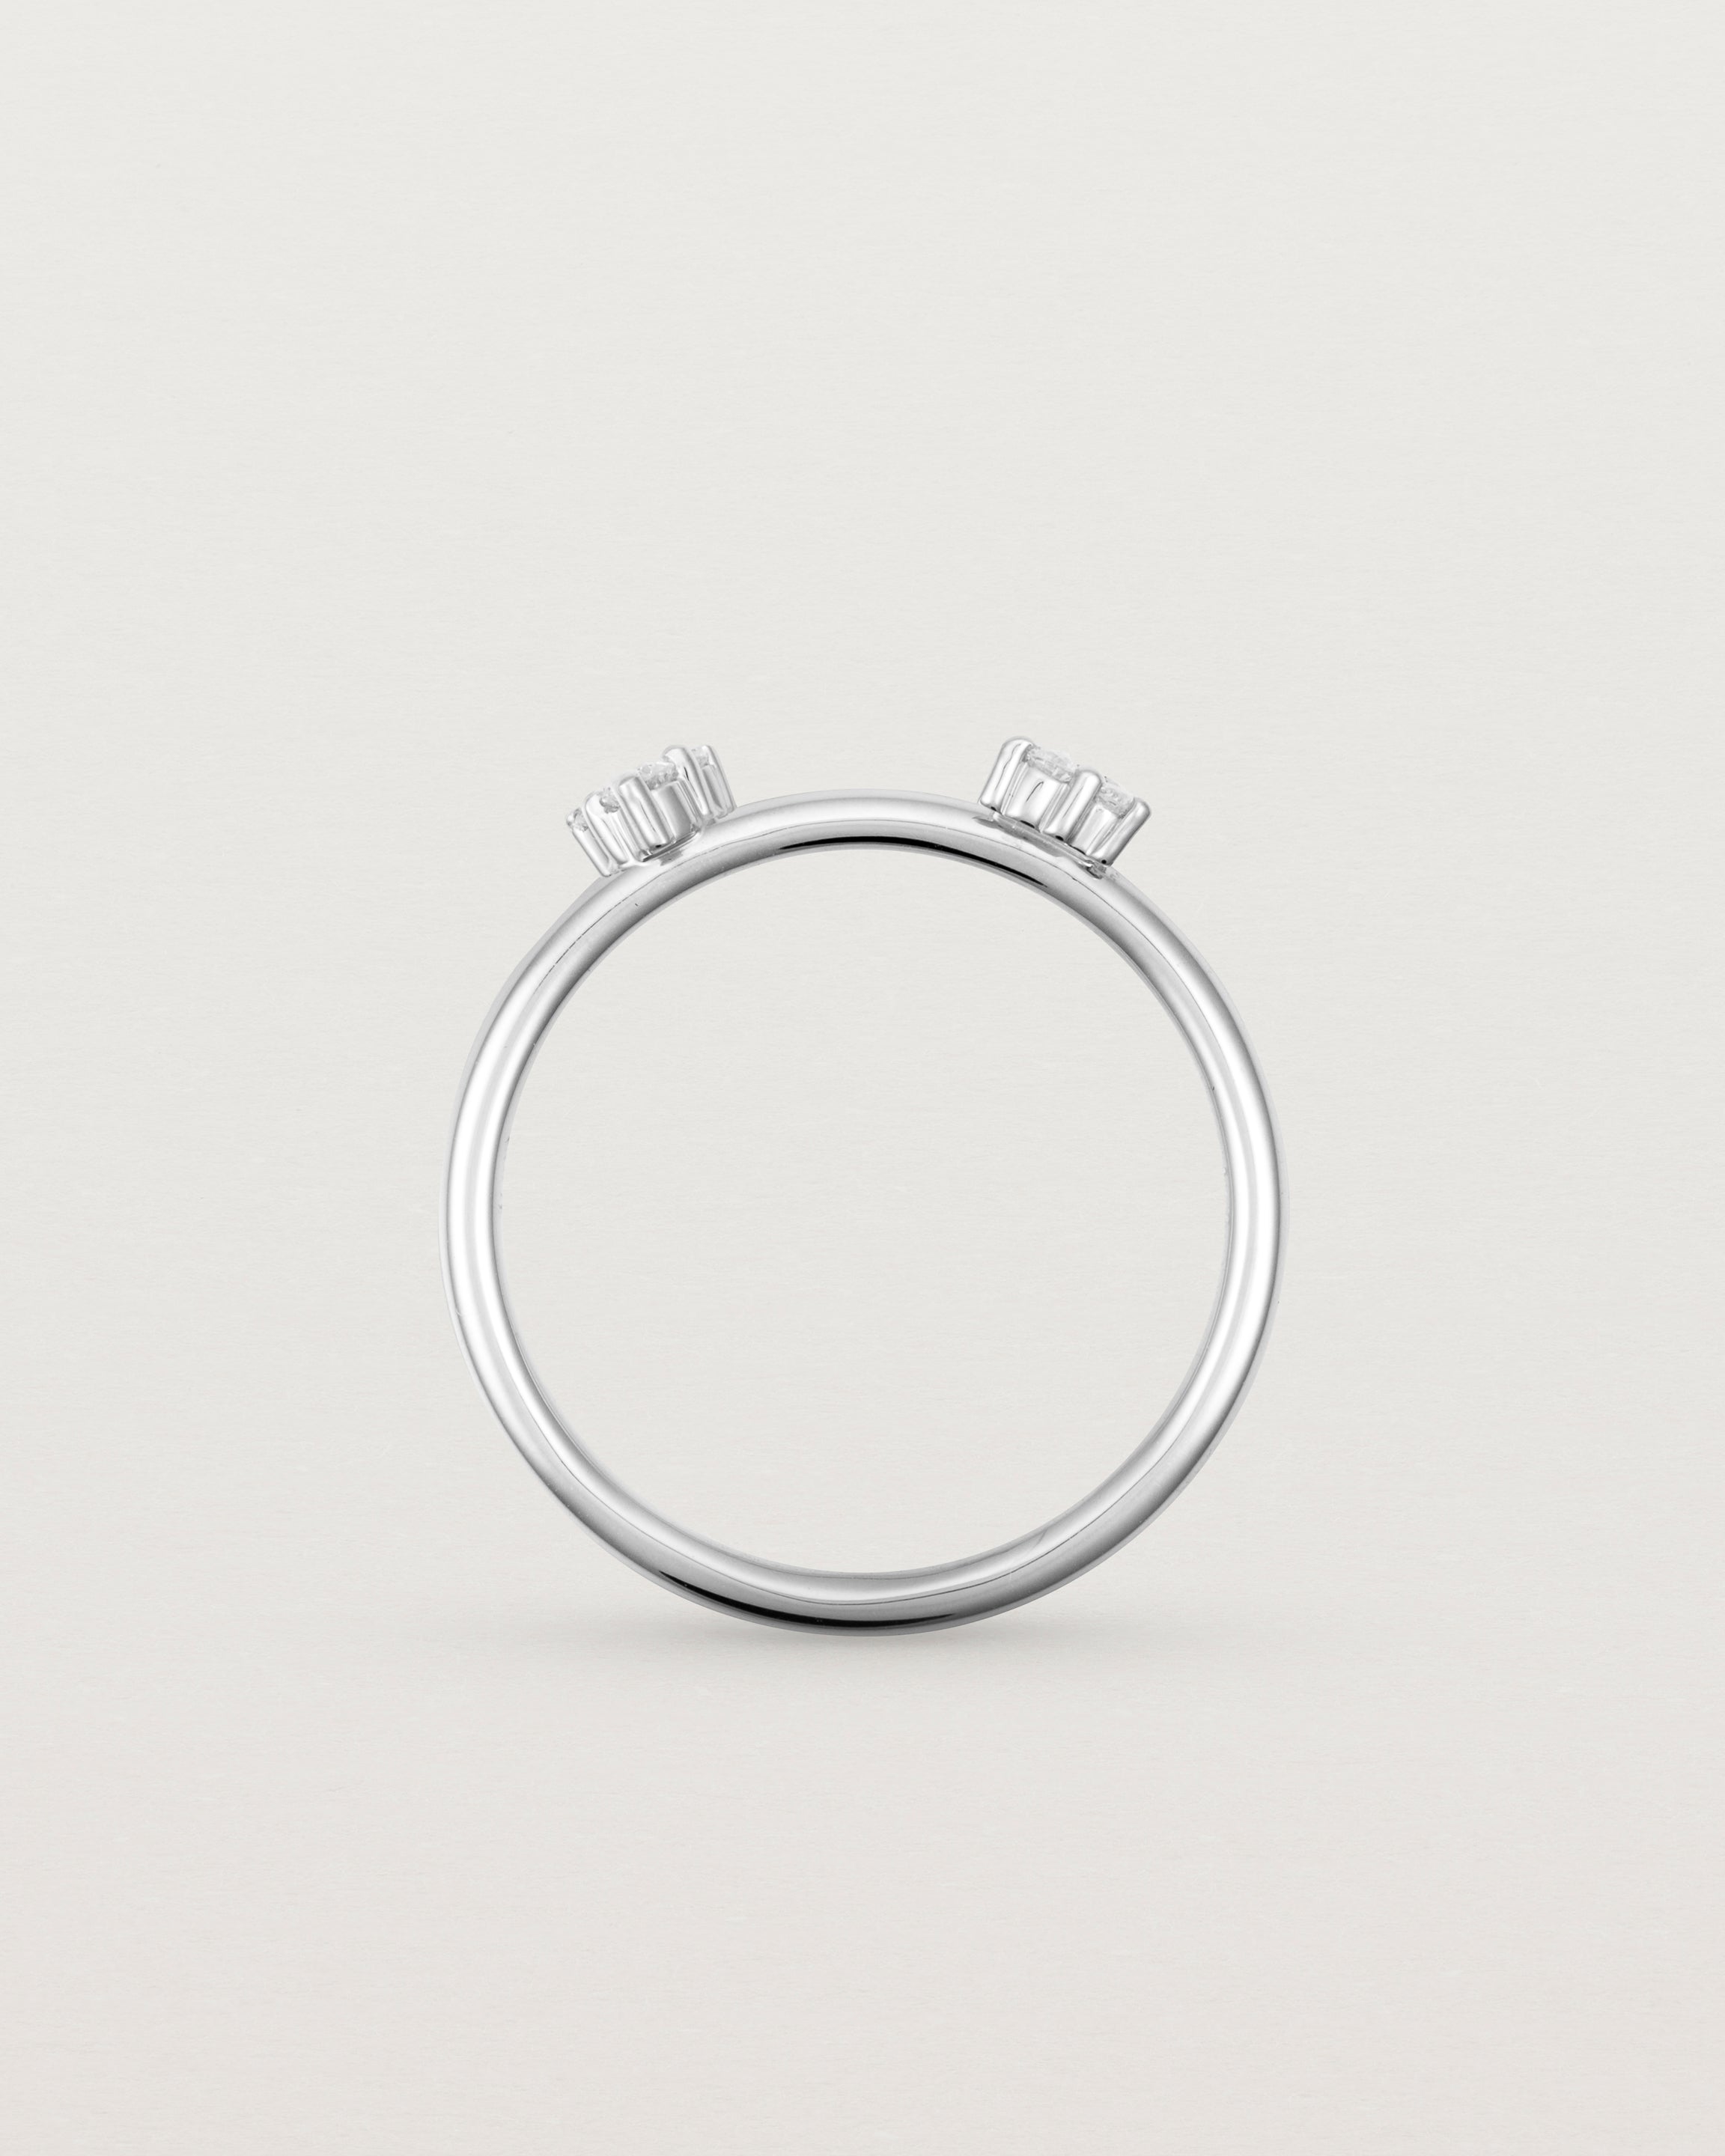 Standing view of the Della Cluster Ring | Diamonds | White Gold.